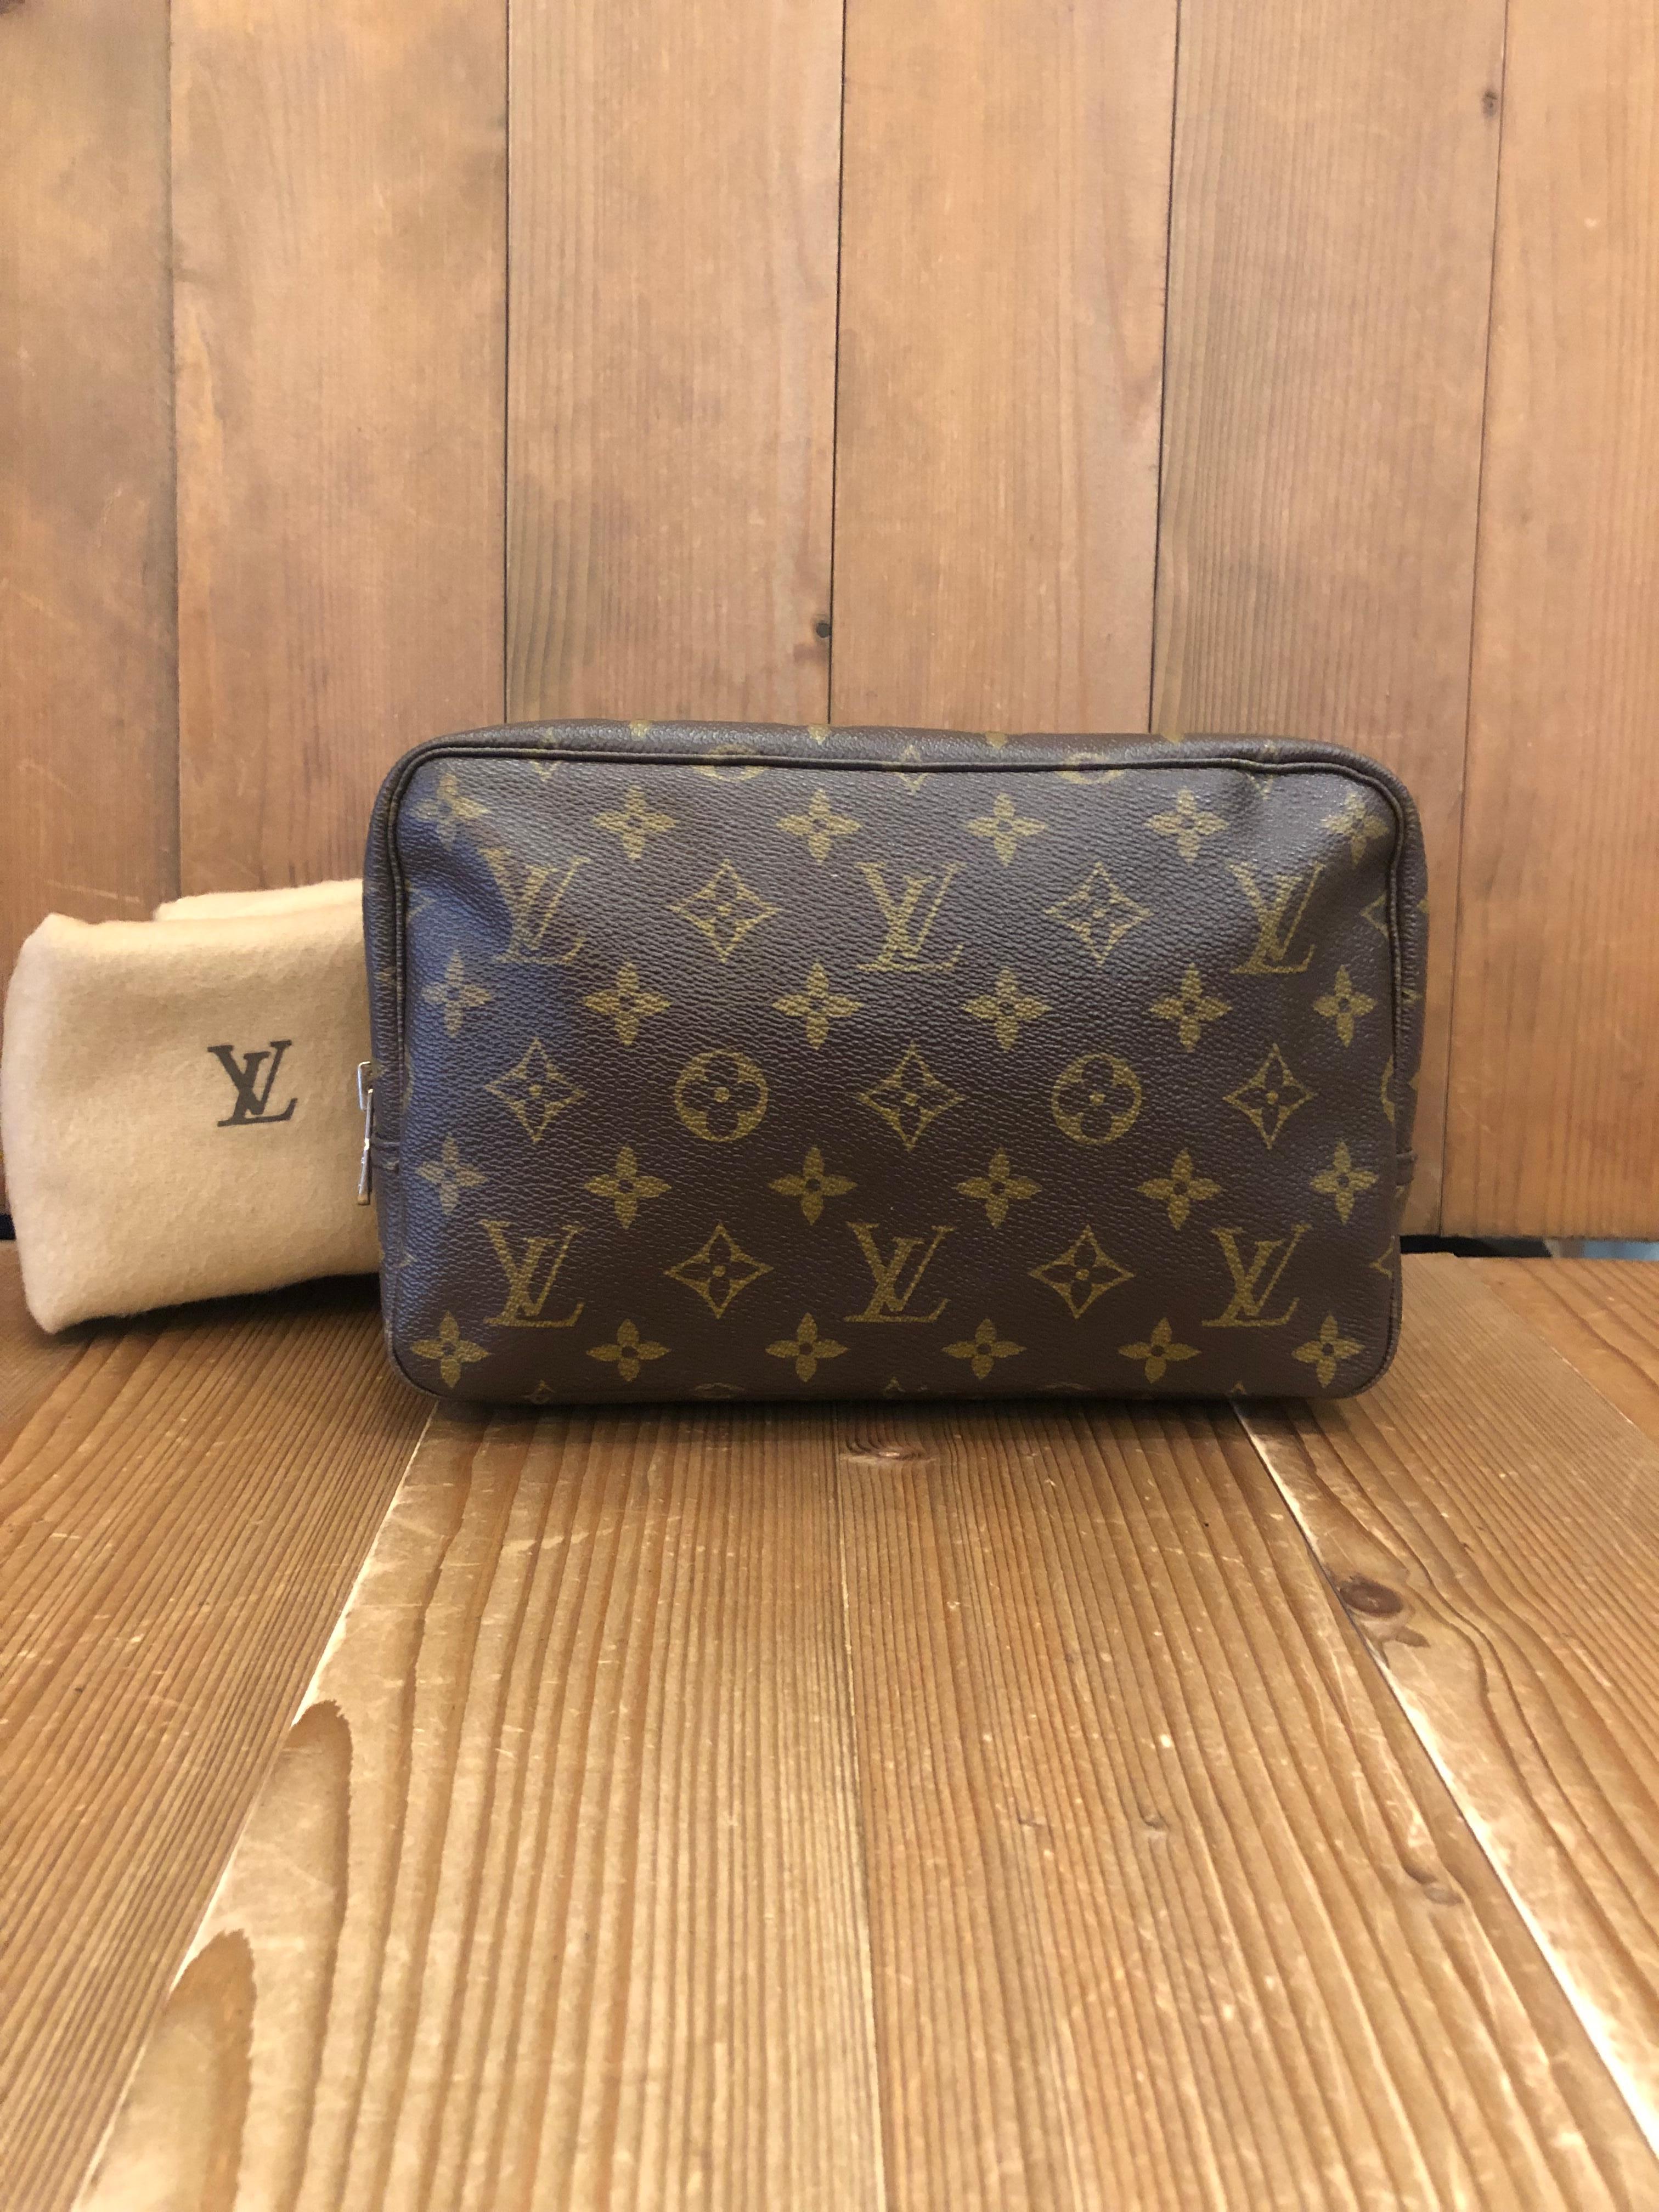 This vintage Louis Vuitton cosmetic pouch is crafted of Louis Vuitton coated monogram canvas. The zip around feature lets you open the pouch wide to fit in your make-up and toiletry essentials. This is the ideal pouch for traveling or simply the